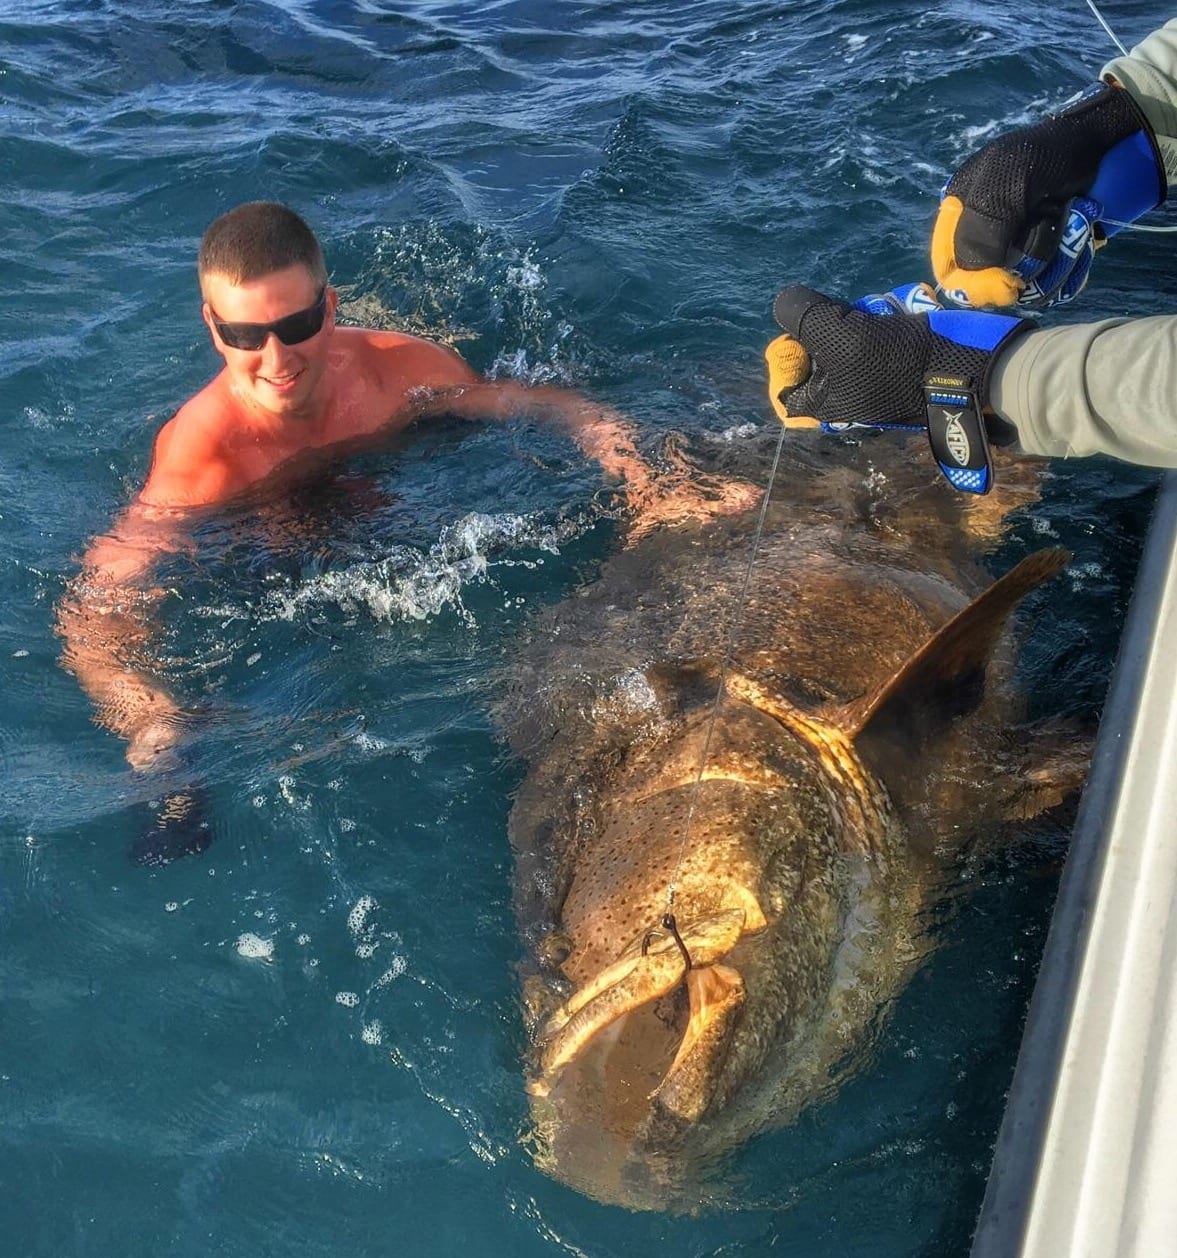 Goliath Grouper Fishing in Clearwater